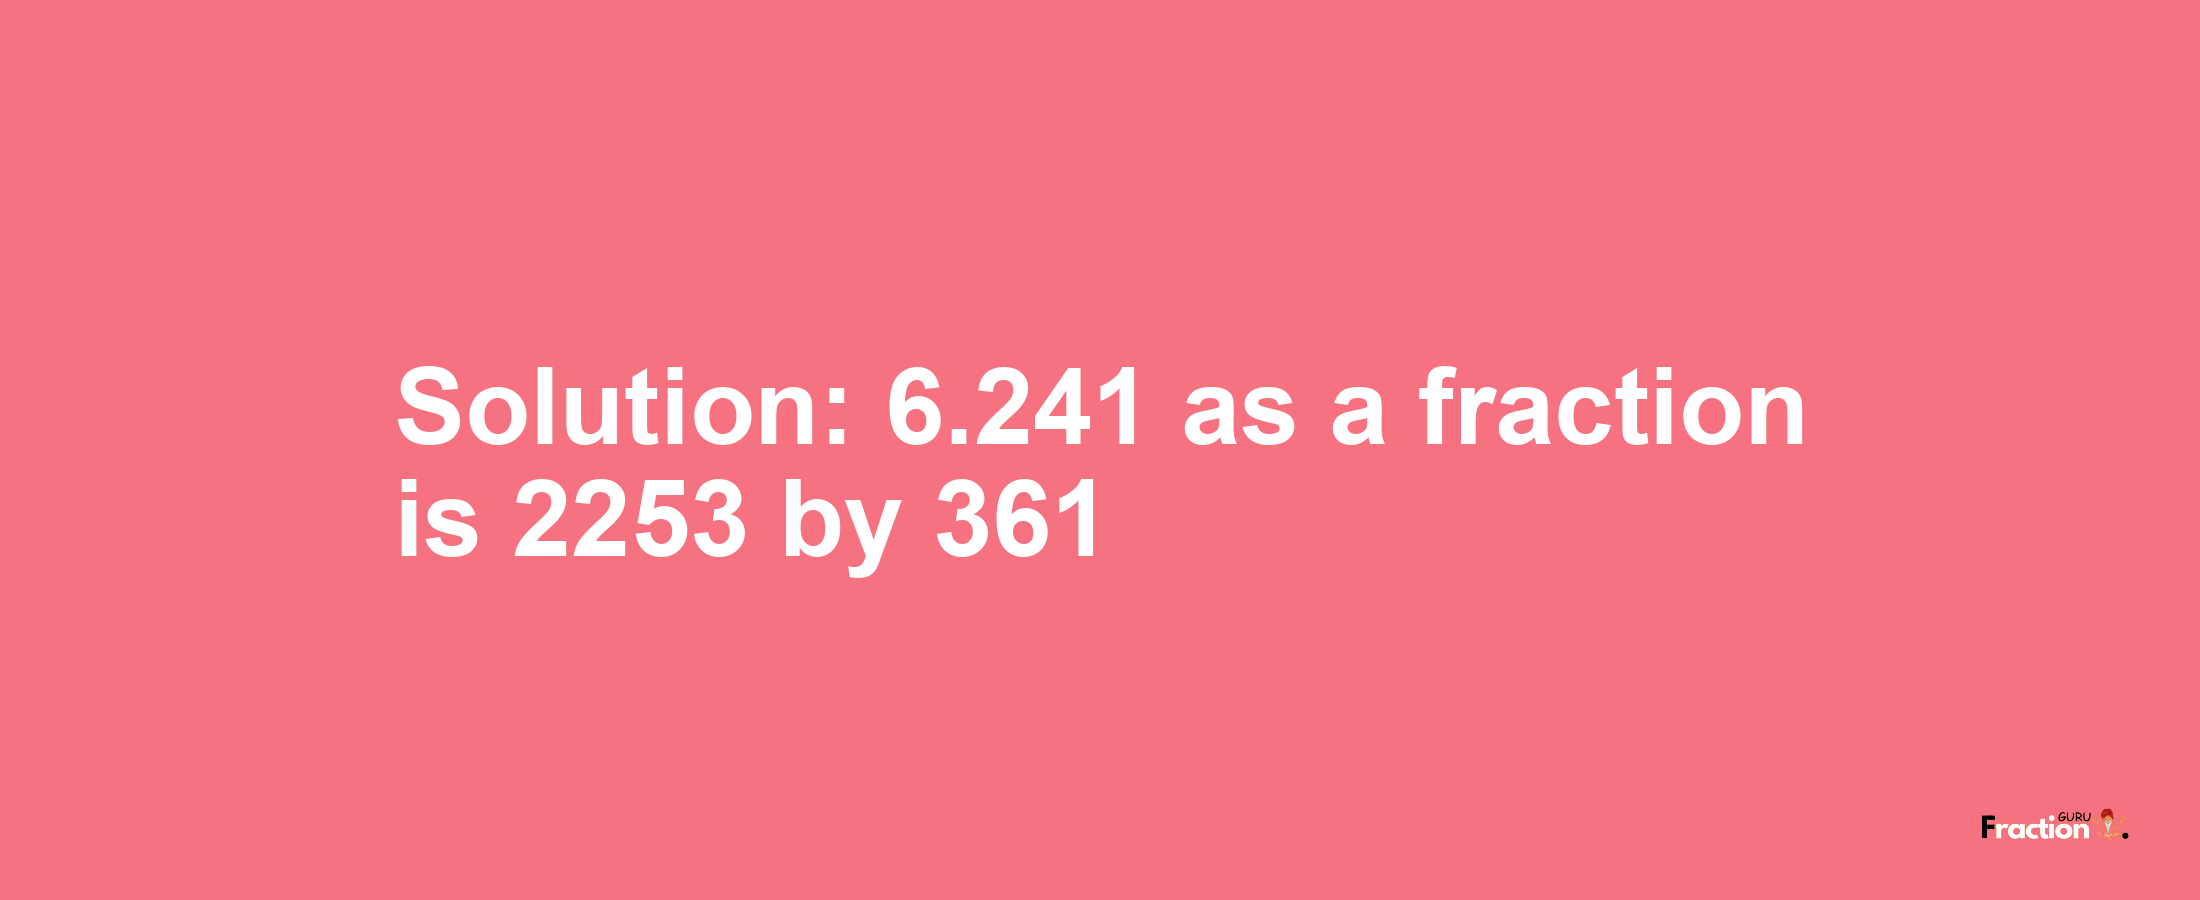 Solution:6.241 as a fraction is 2253/361